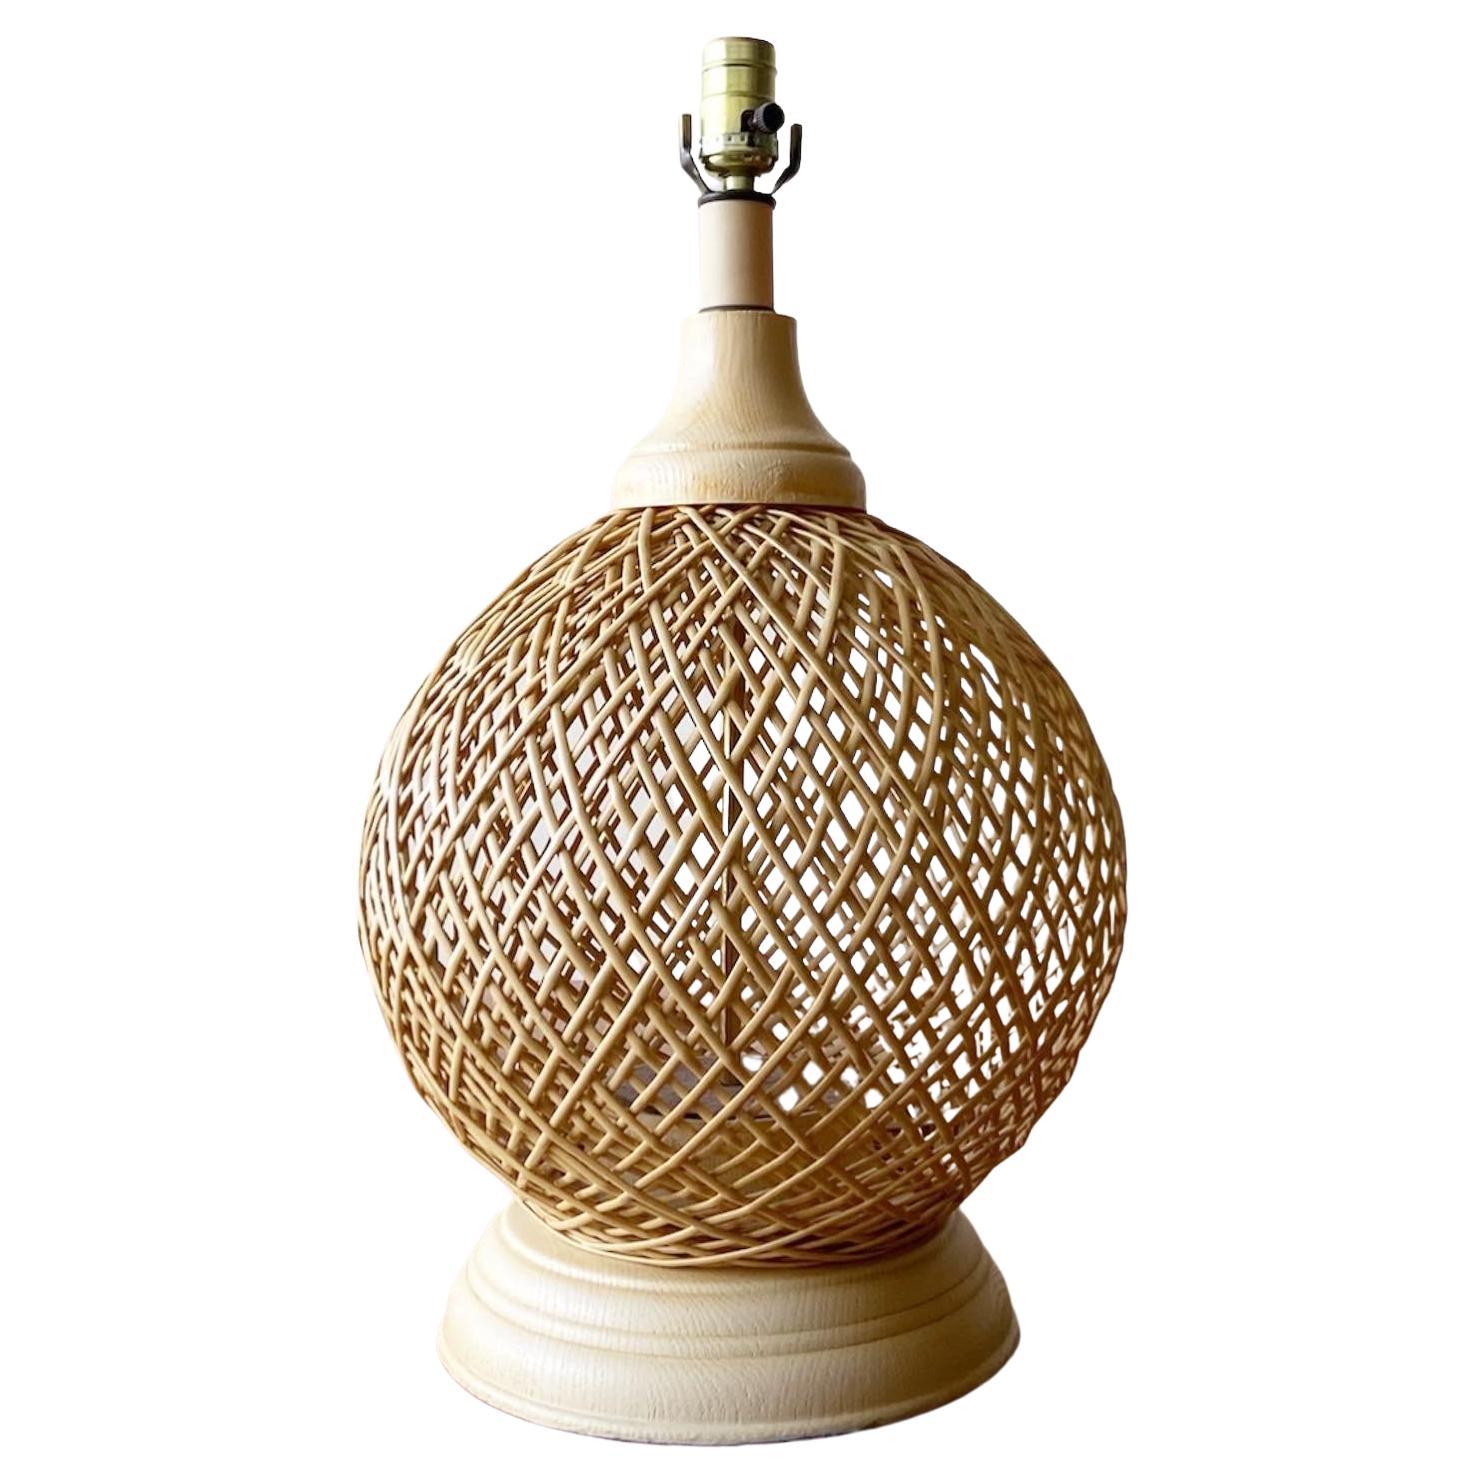 Boho Chic Spherical Reed Table Lamp For Sale